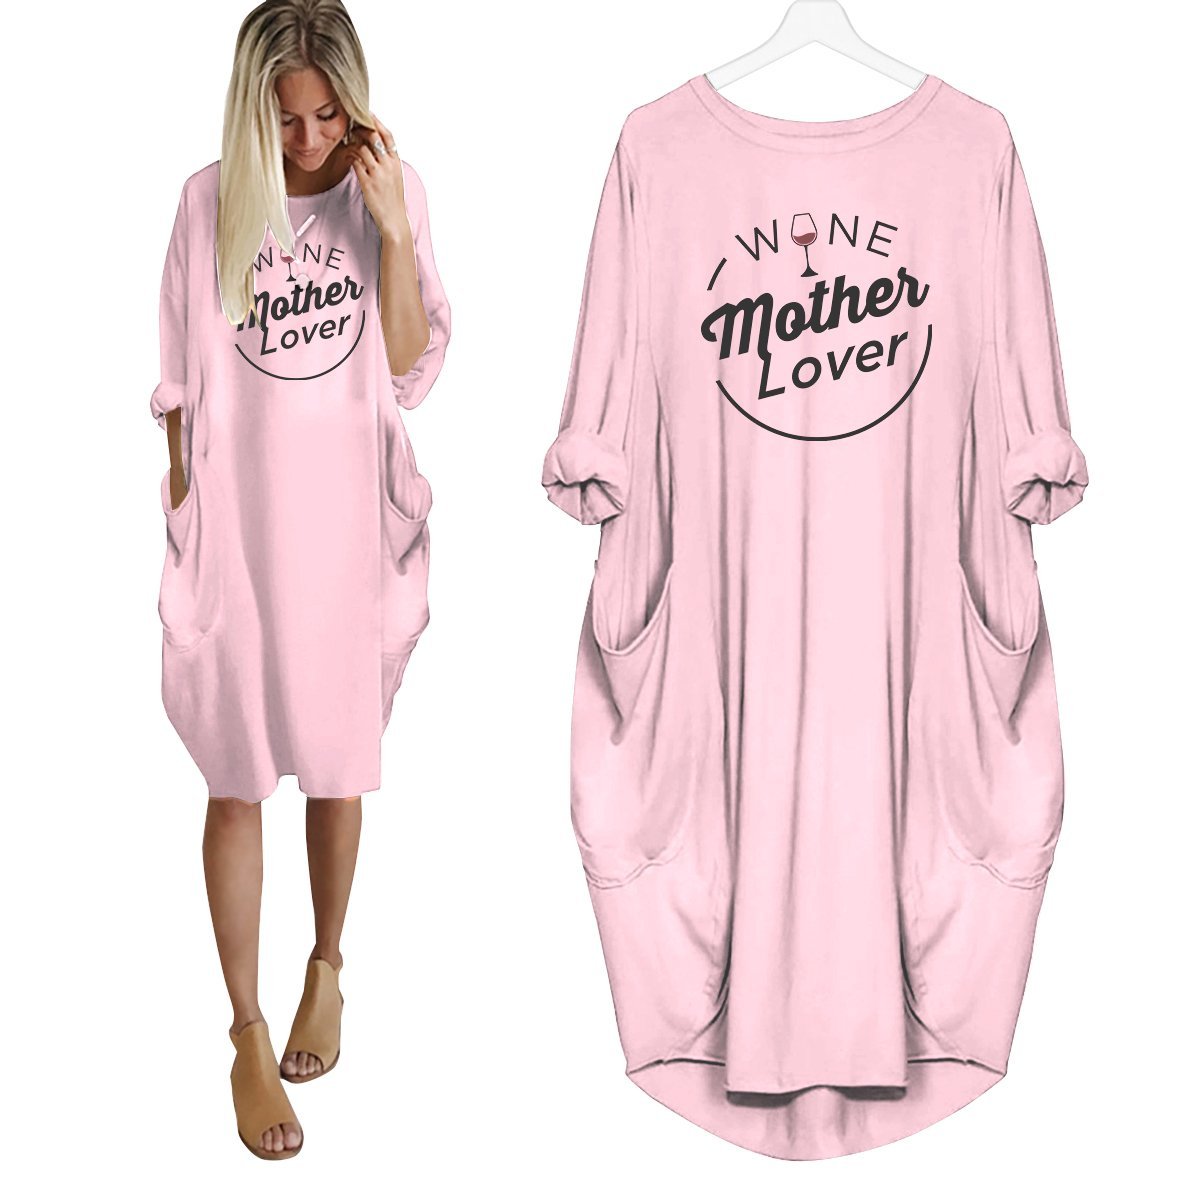 Wine Mother Lover Dress Pink / S